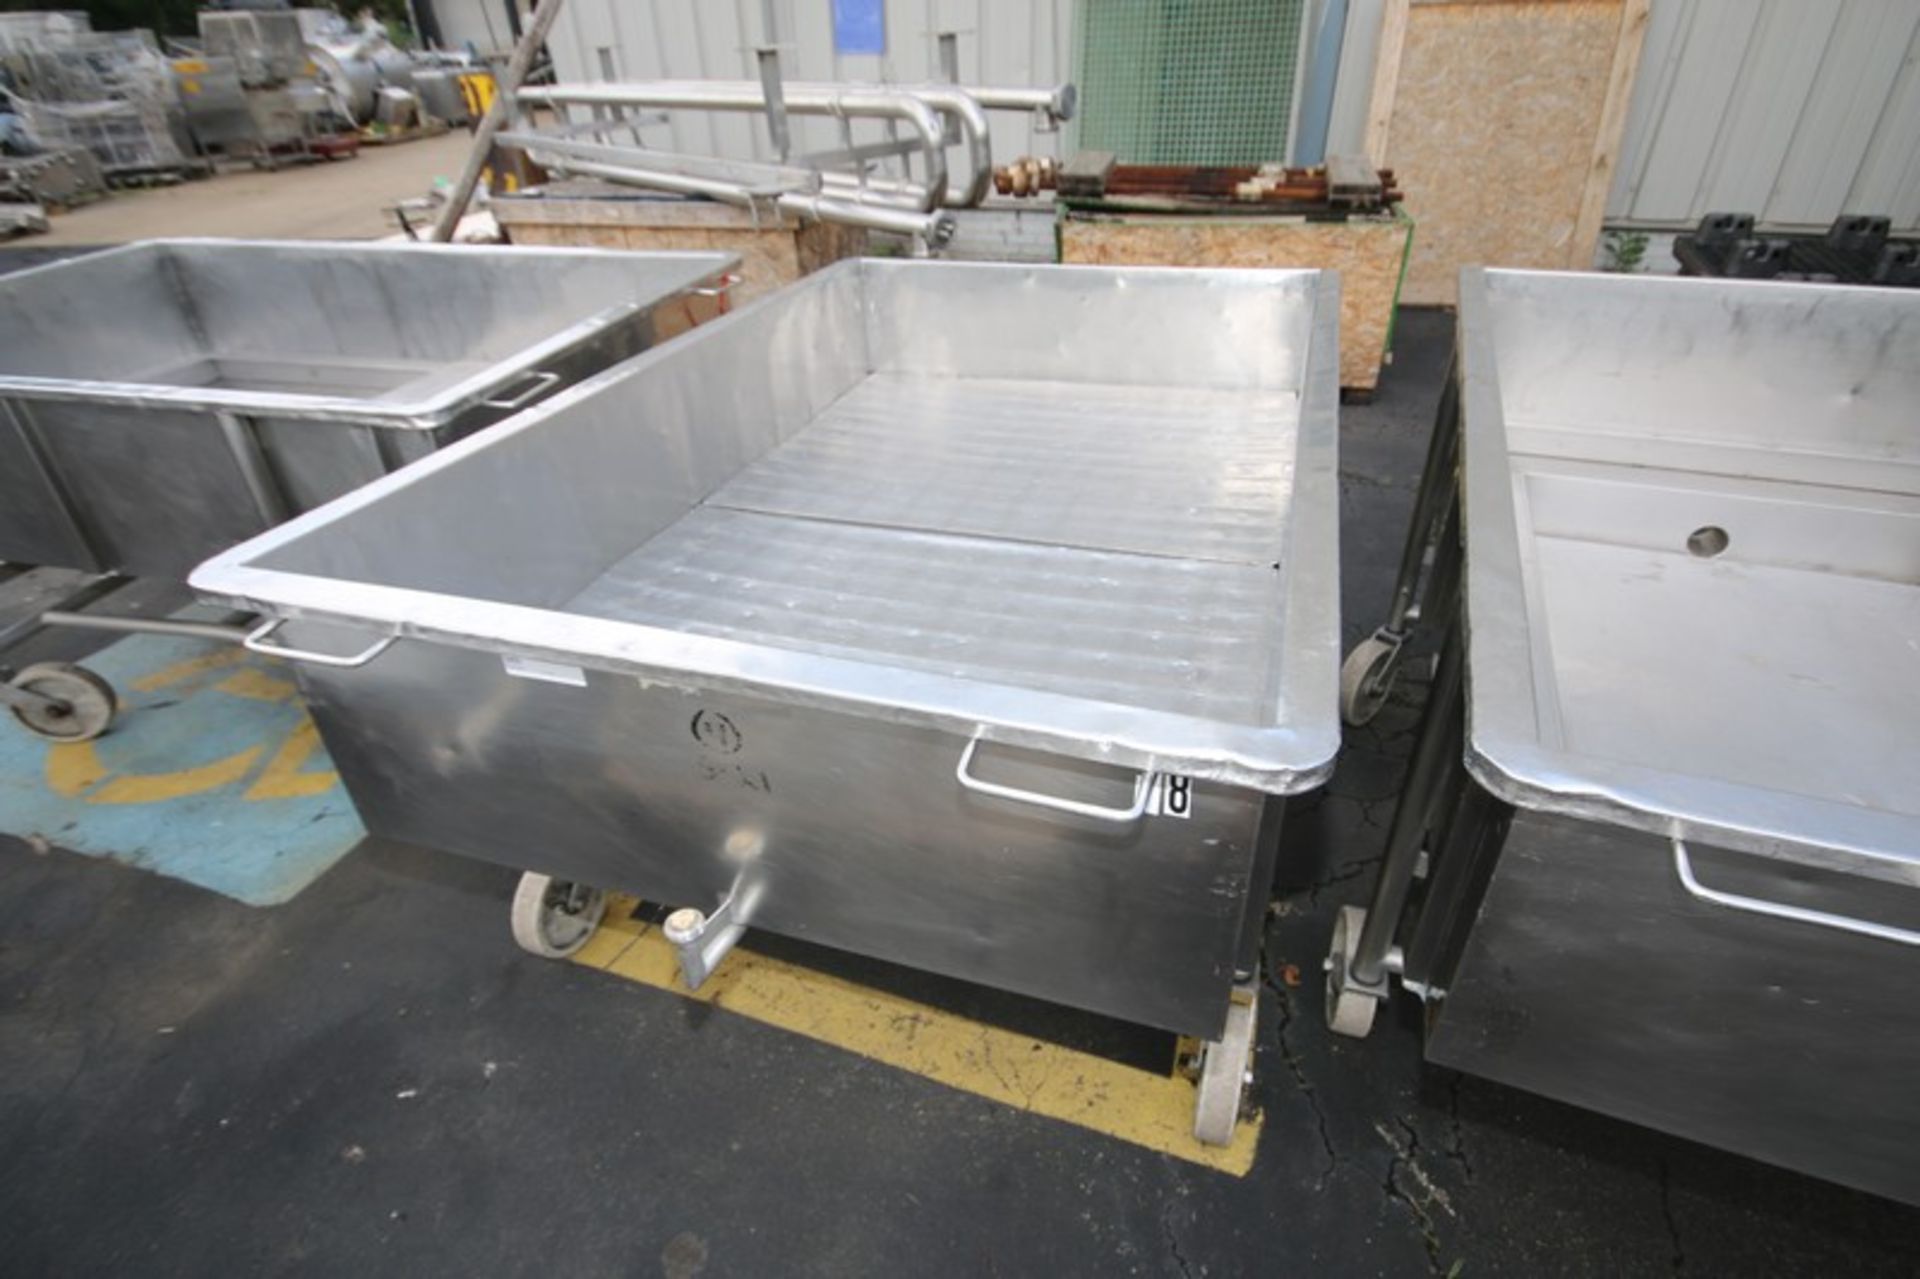 Portable S/S Cheese Drain Table,3" Clamp Type Bottom Connection, Internal Dims.: 70" L x 44" W x 16"